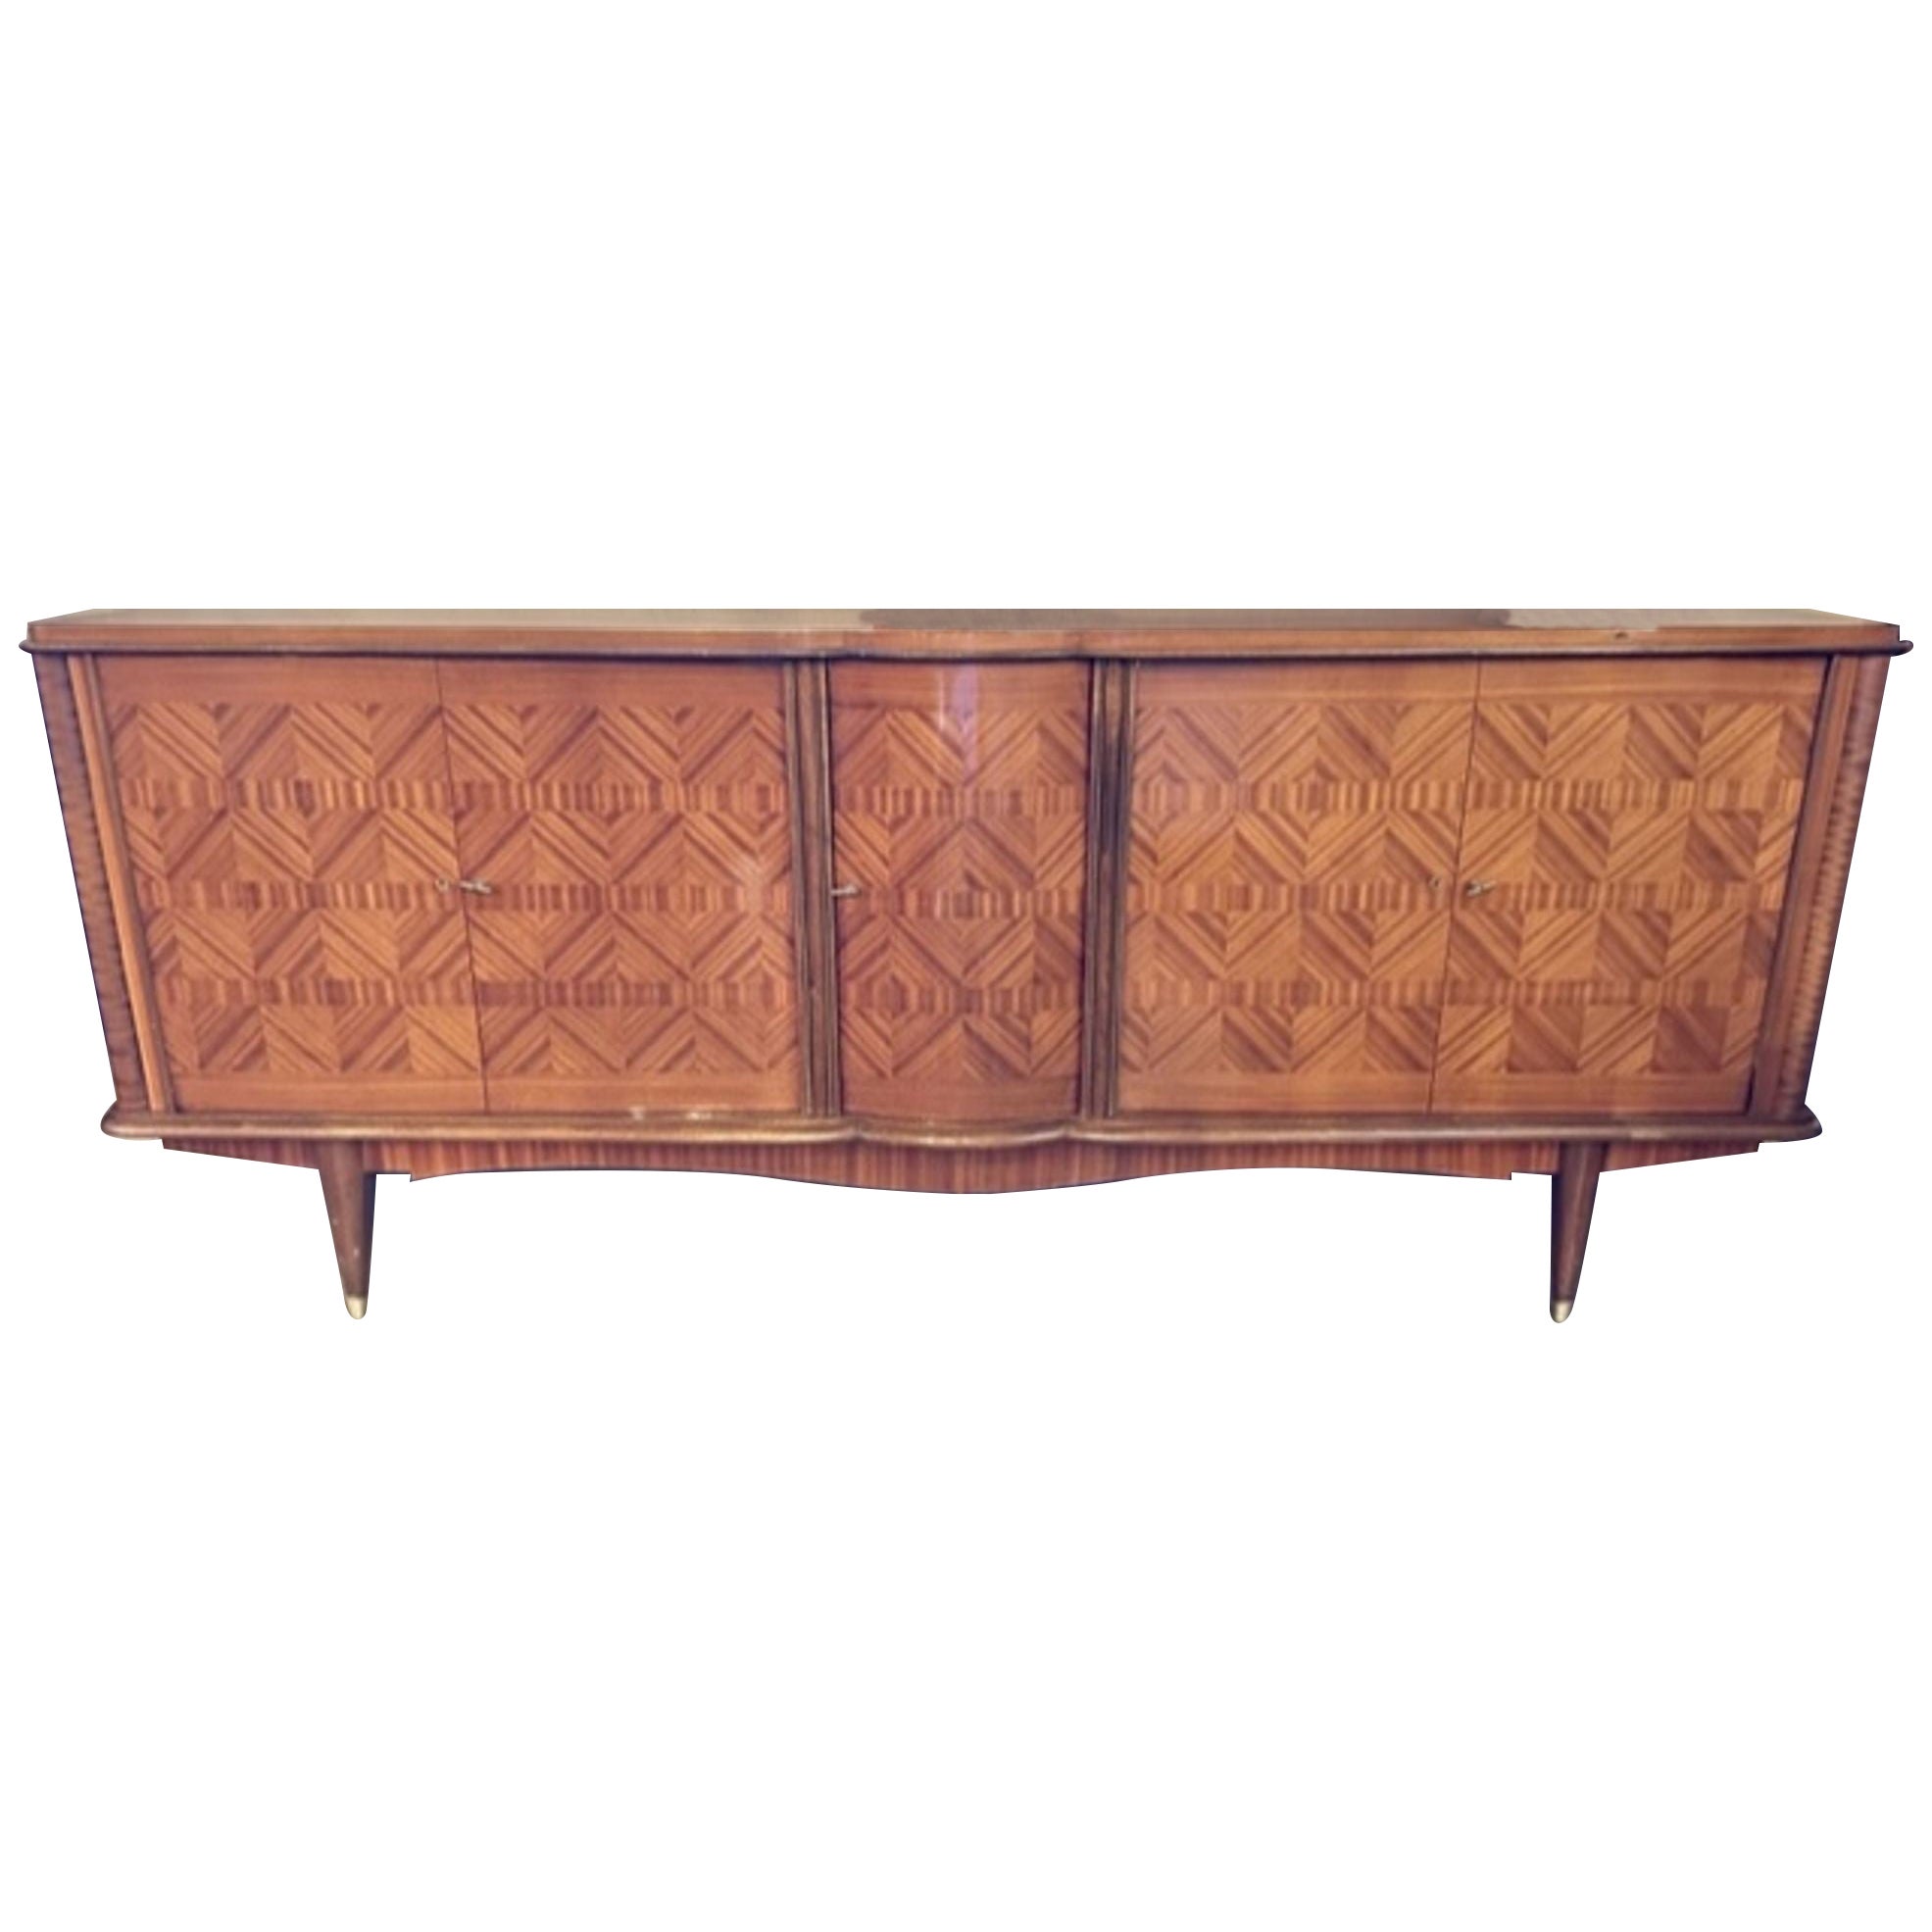 Mid Century German Art Deco Mahogany and Brass Patterned Sideboard